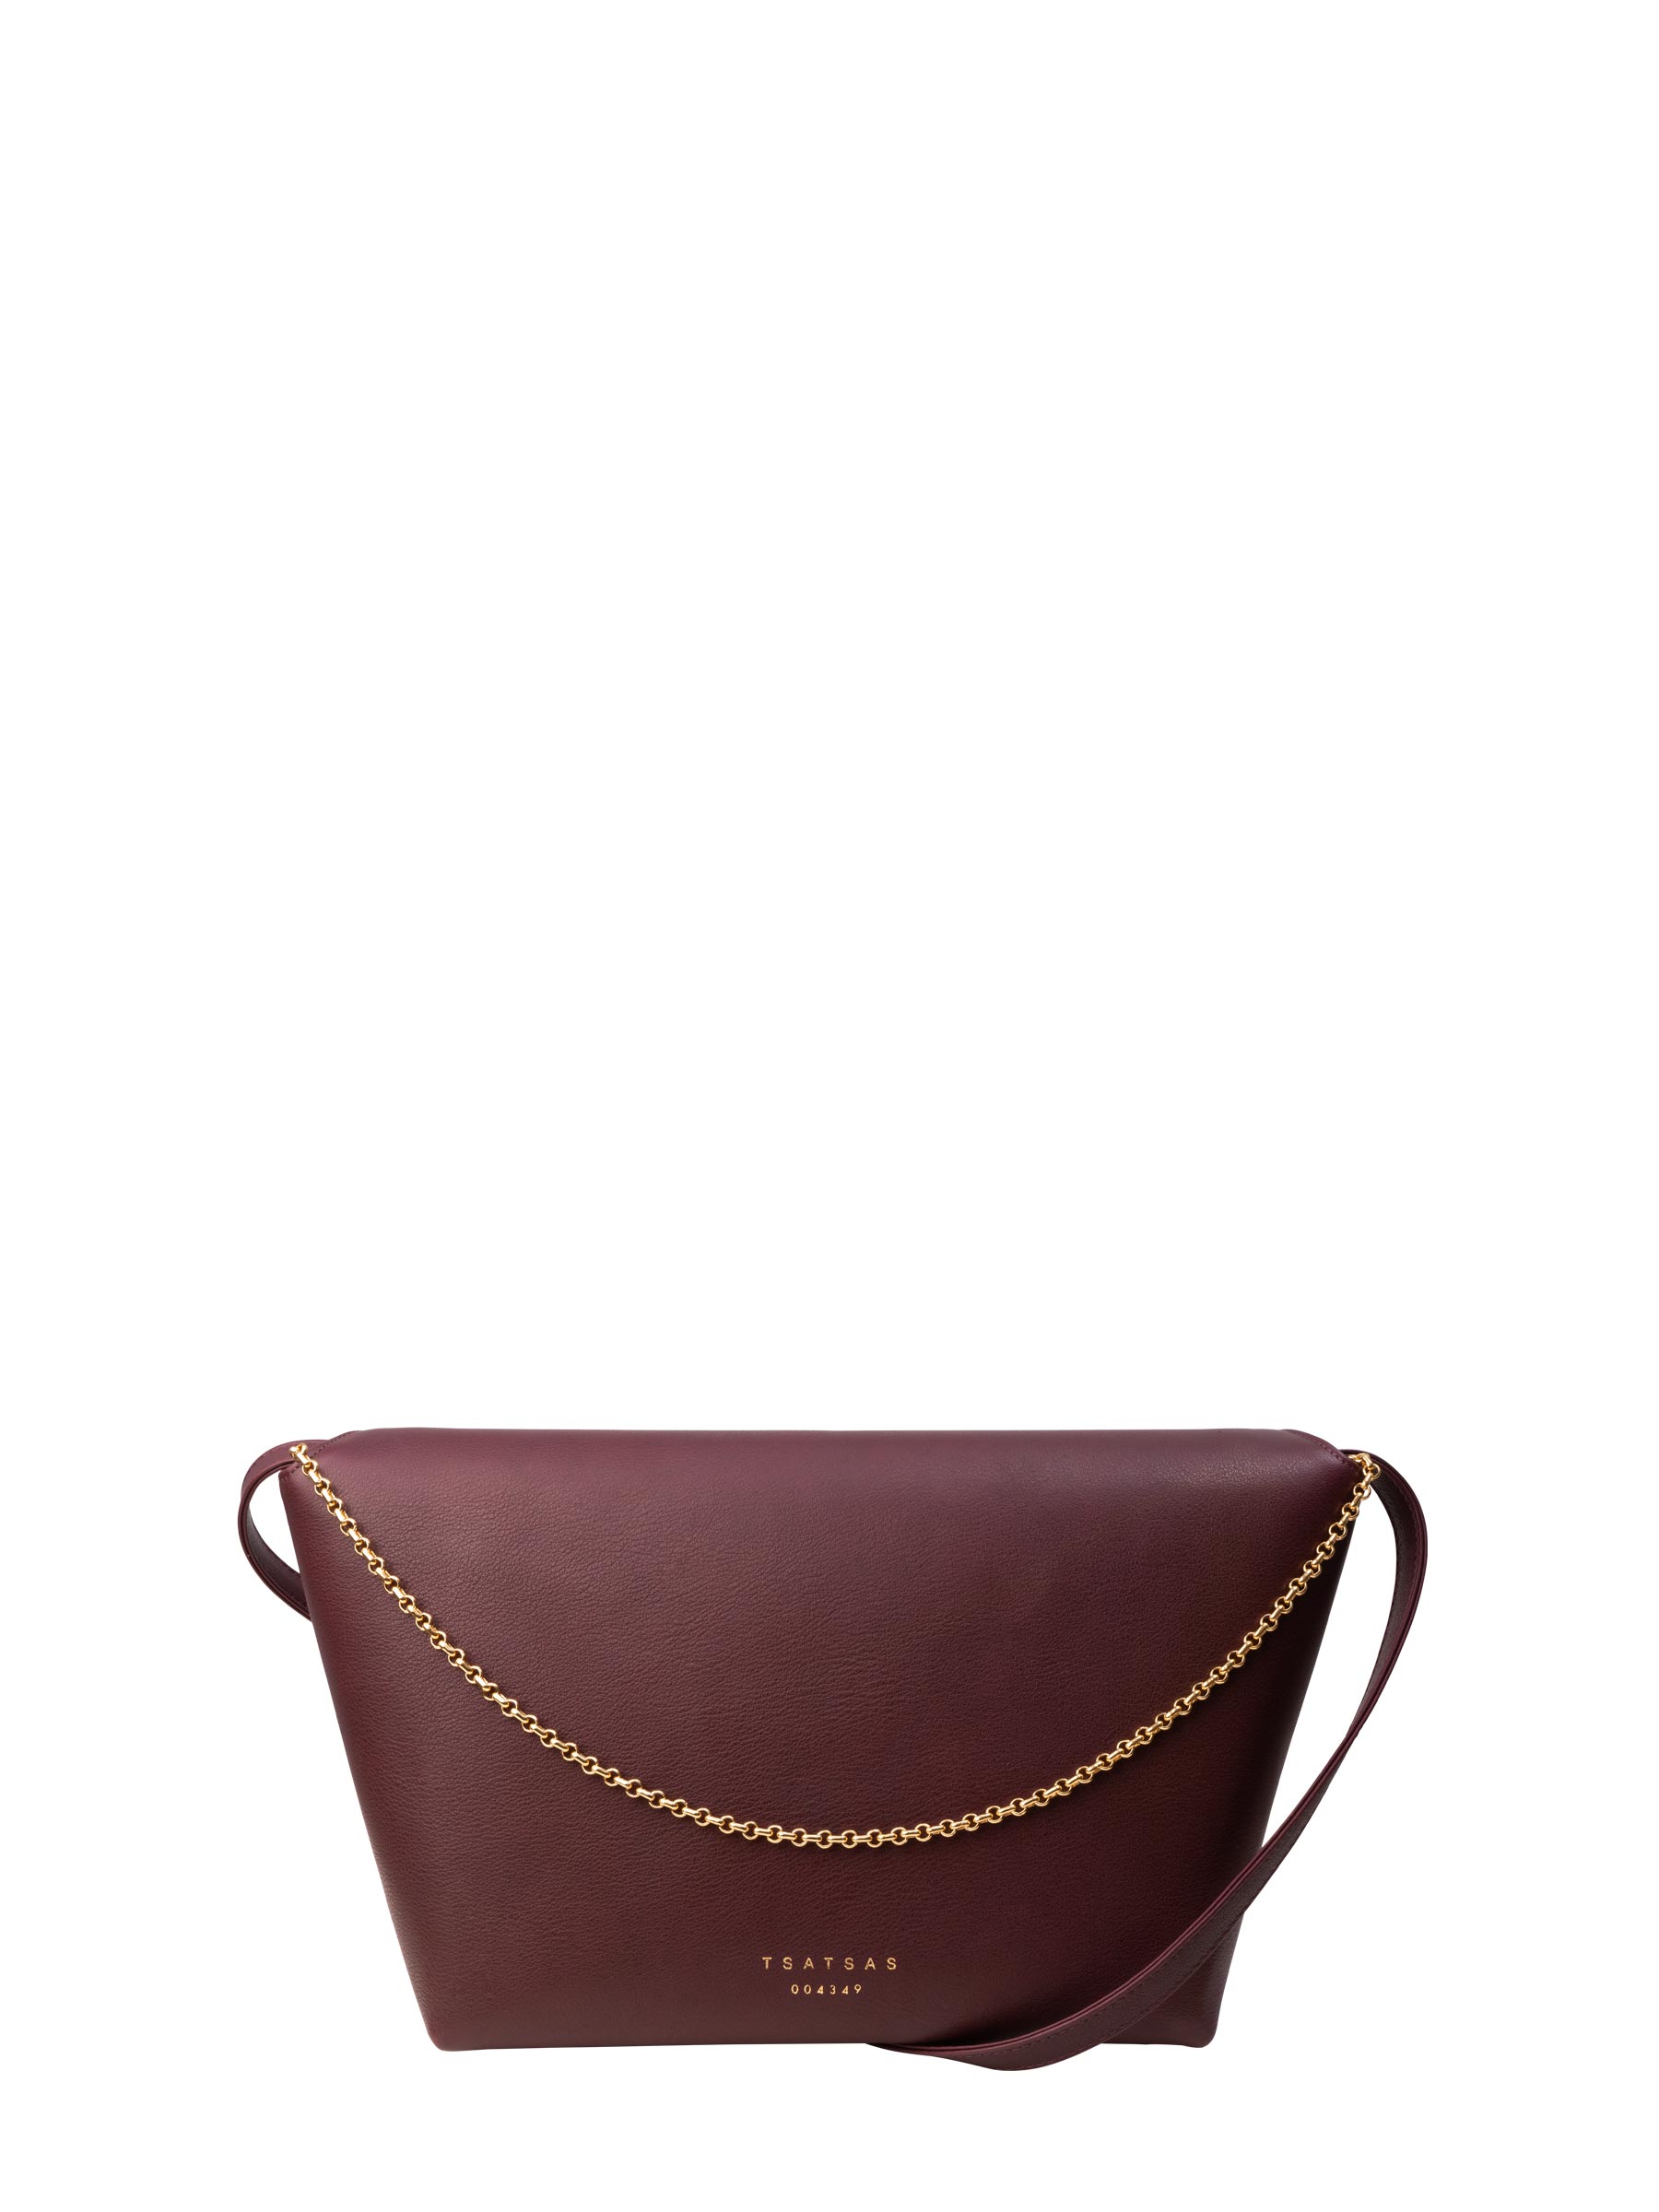 Small Leather Purse with Removable Shoulder Strap and Internal